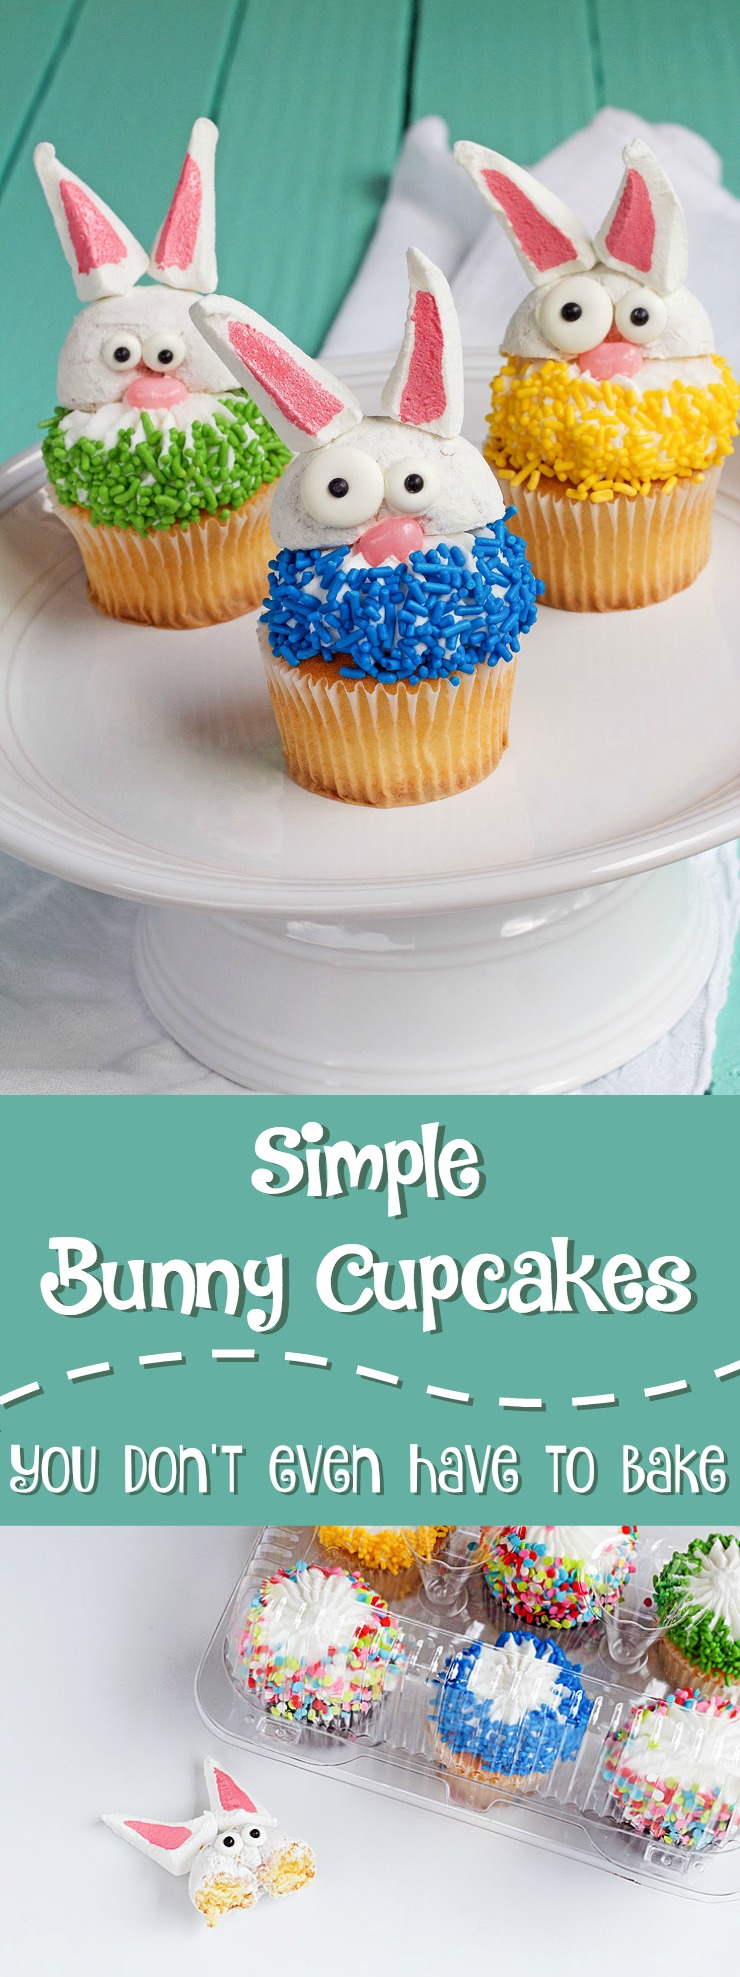 Cute Bunny Cupcakes and You Don't Even Need to Bake | The Bearfoot Baker